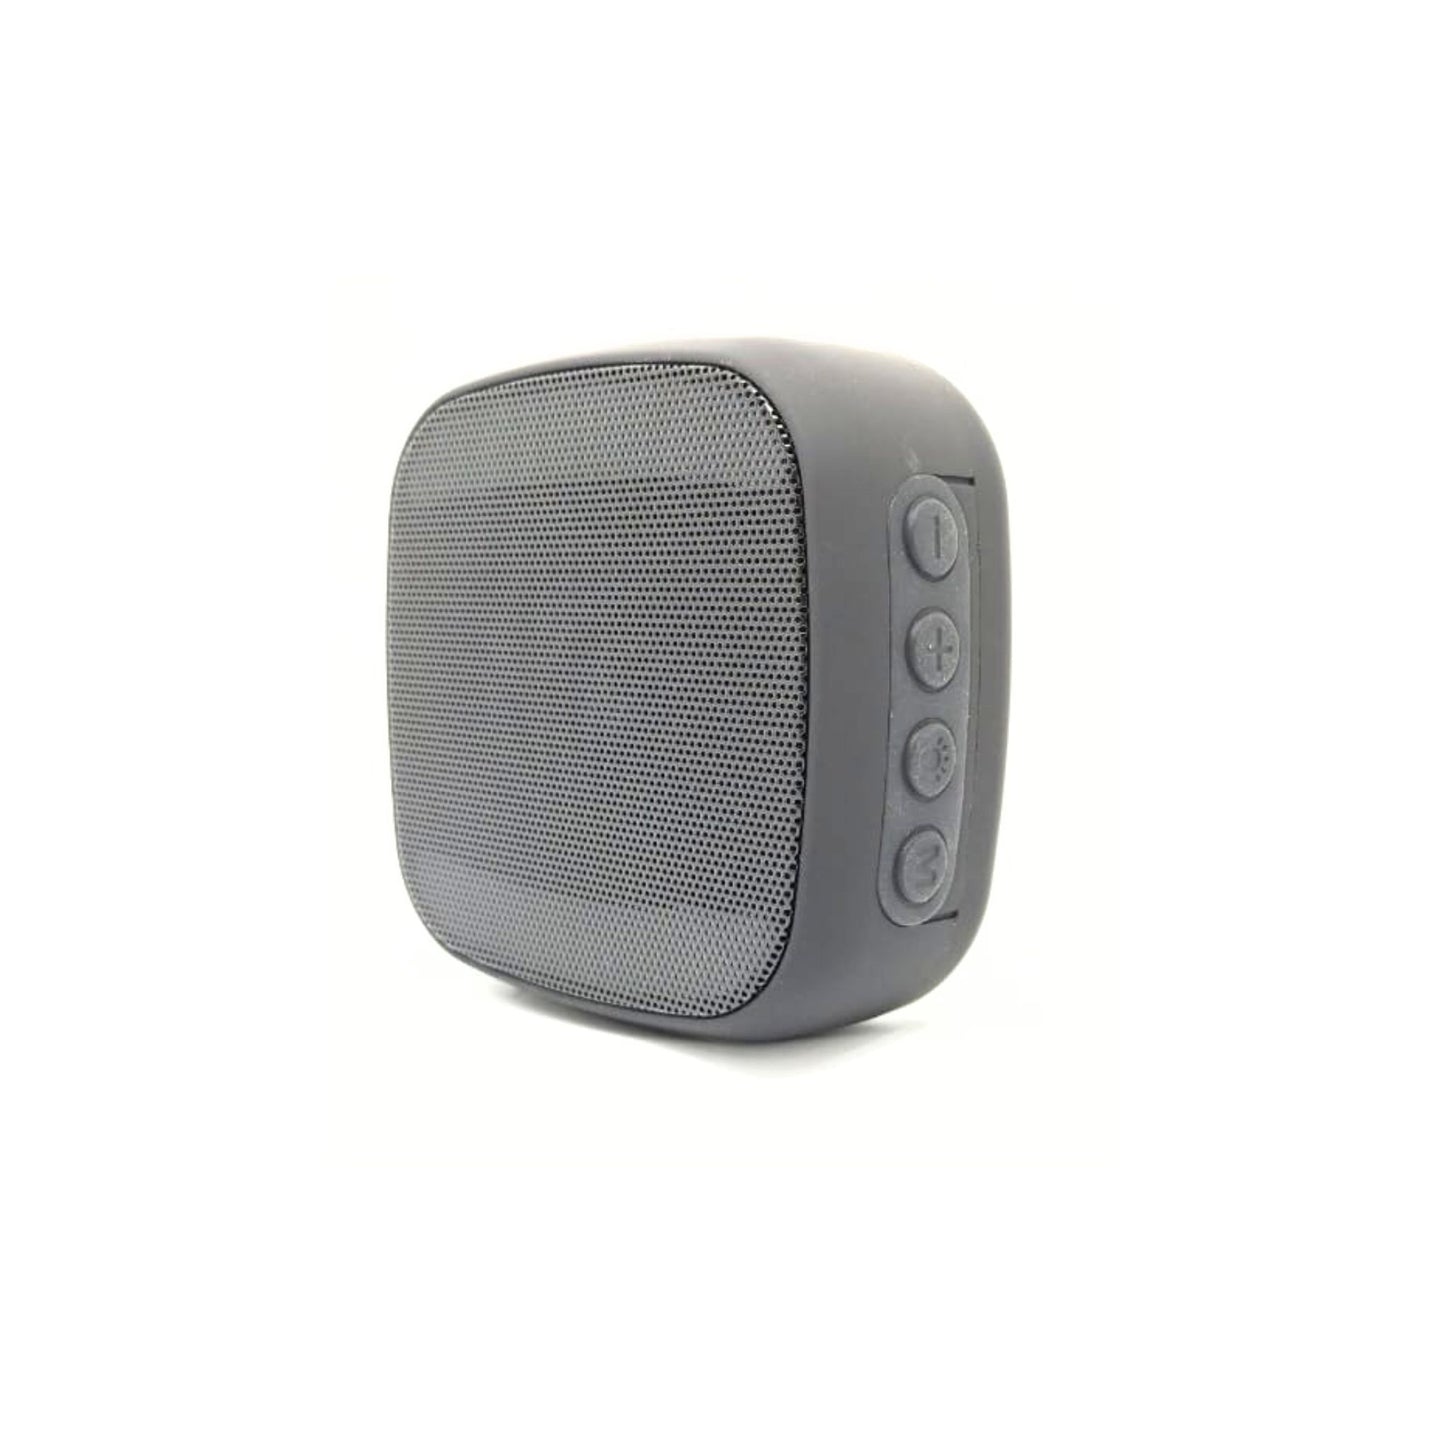 Handlebar Bluetooth Speaker for Riding, Bicycle